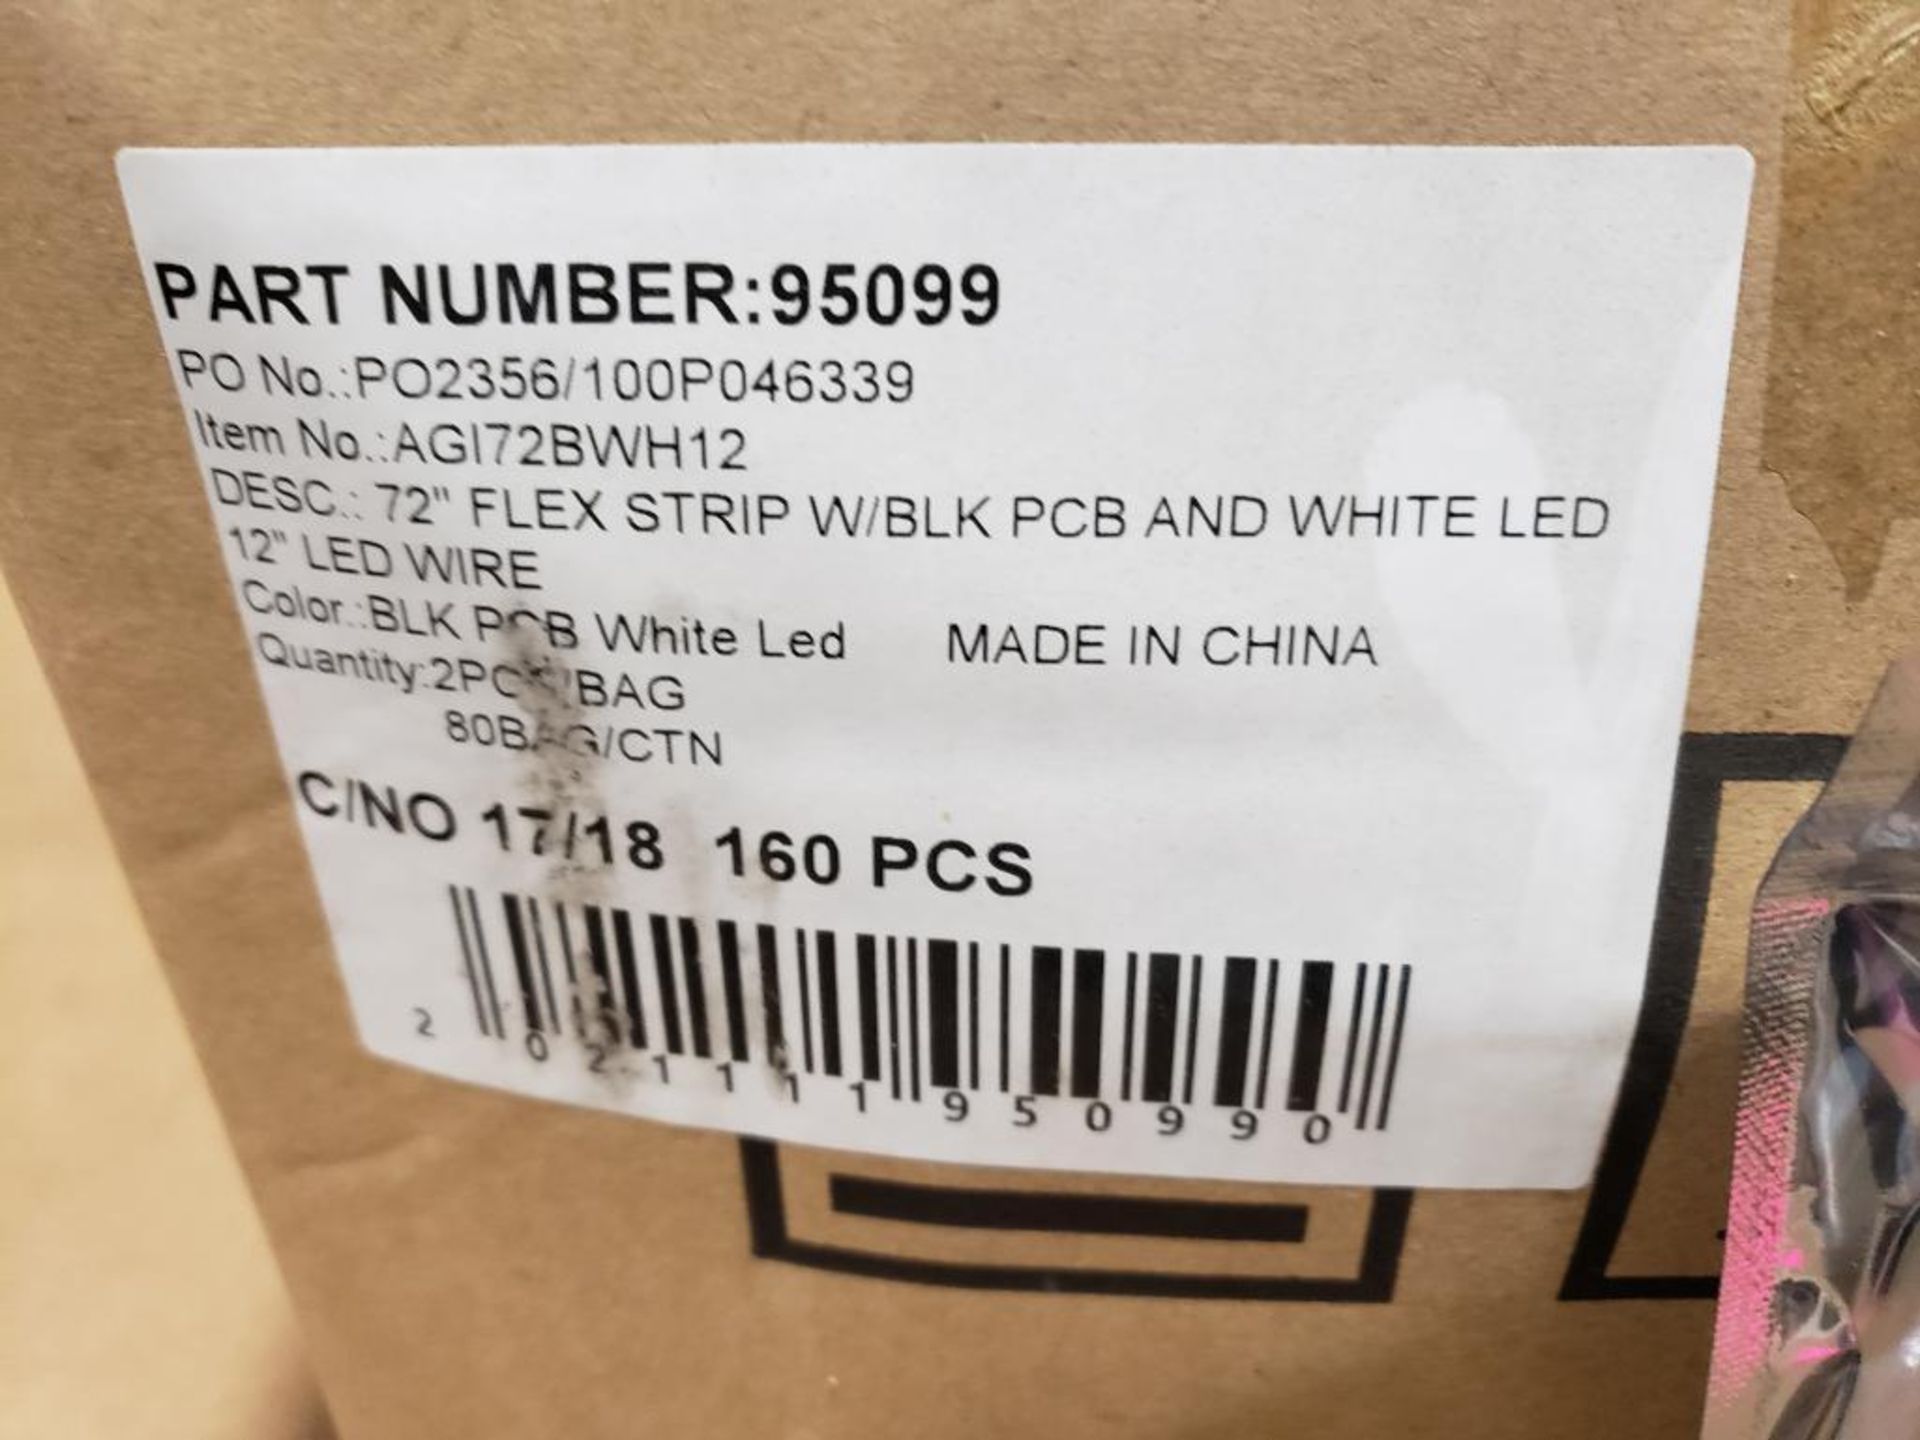 Qty 160 - LED flex strips. 72in flex strip with white LED and 12in LED wire. - Image 4 of 5